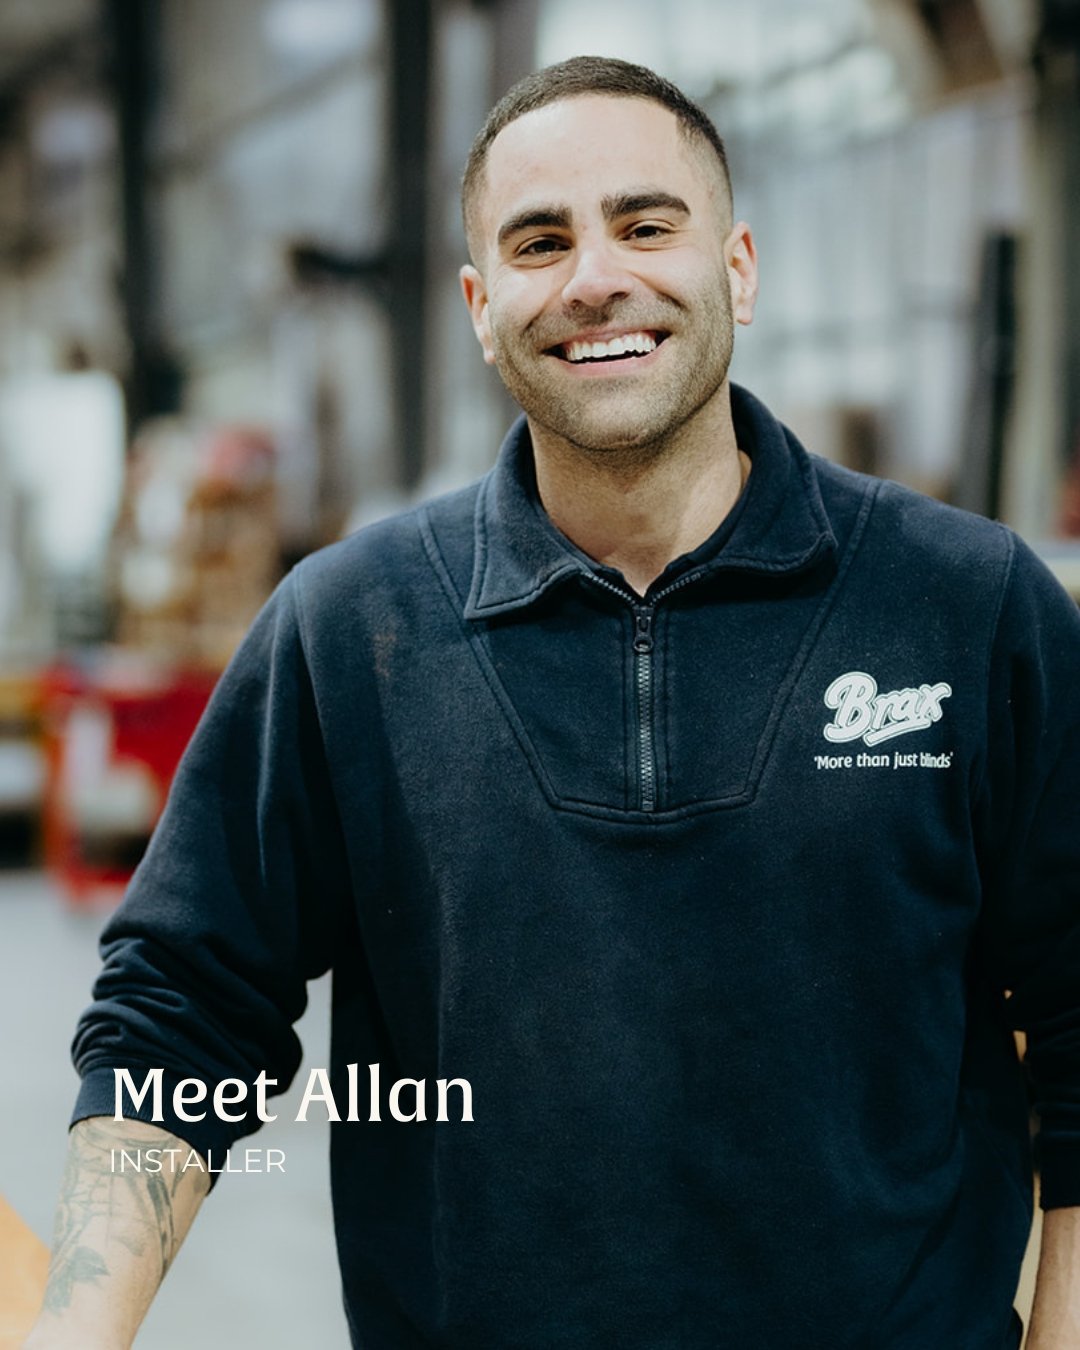 Meet Allan, our wonderful Installer. If you're a Brax customer, it's highly likely you'll meet Allan when it comes time to install your new window treatments! 
With all of his experience, it's worth noting that Allan's recommended product is sheers!
